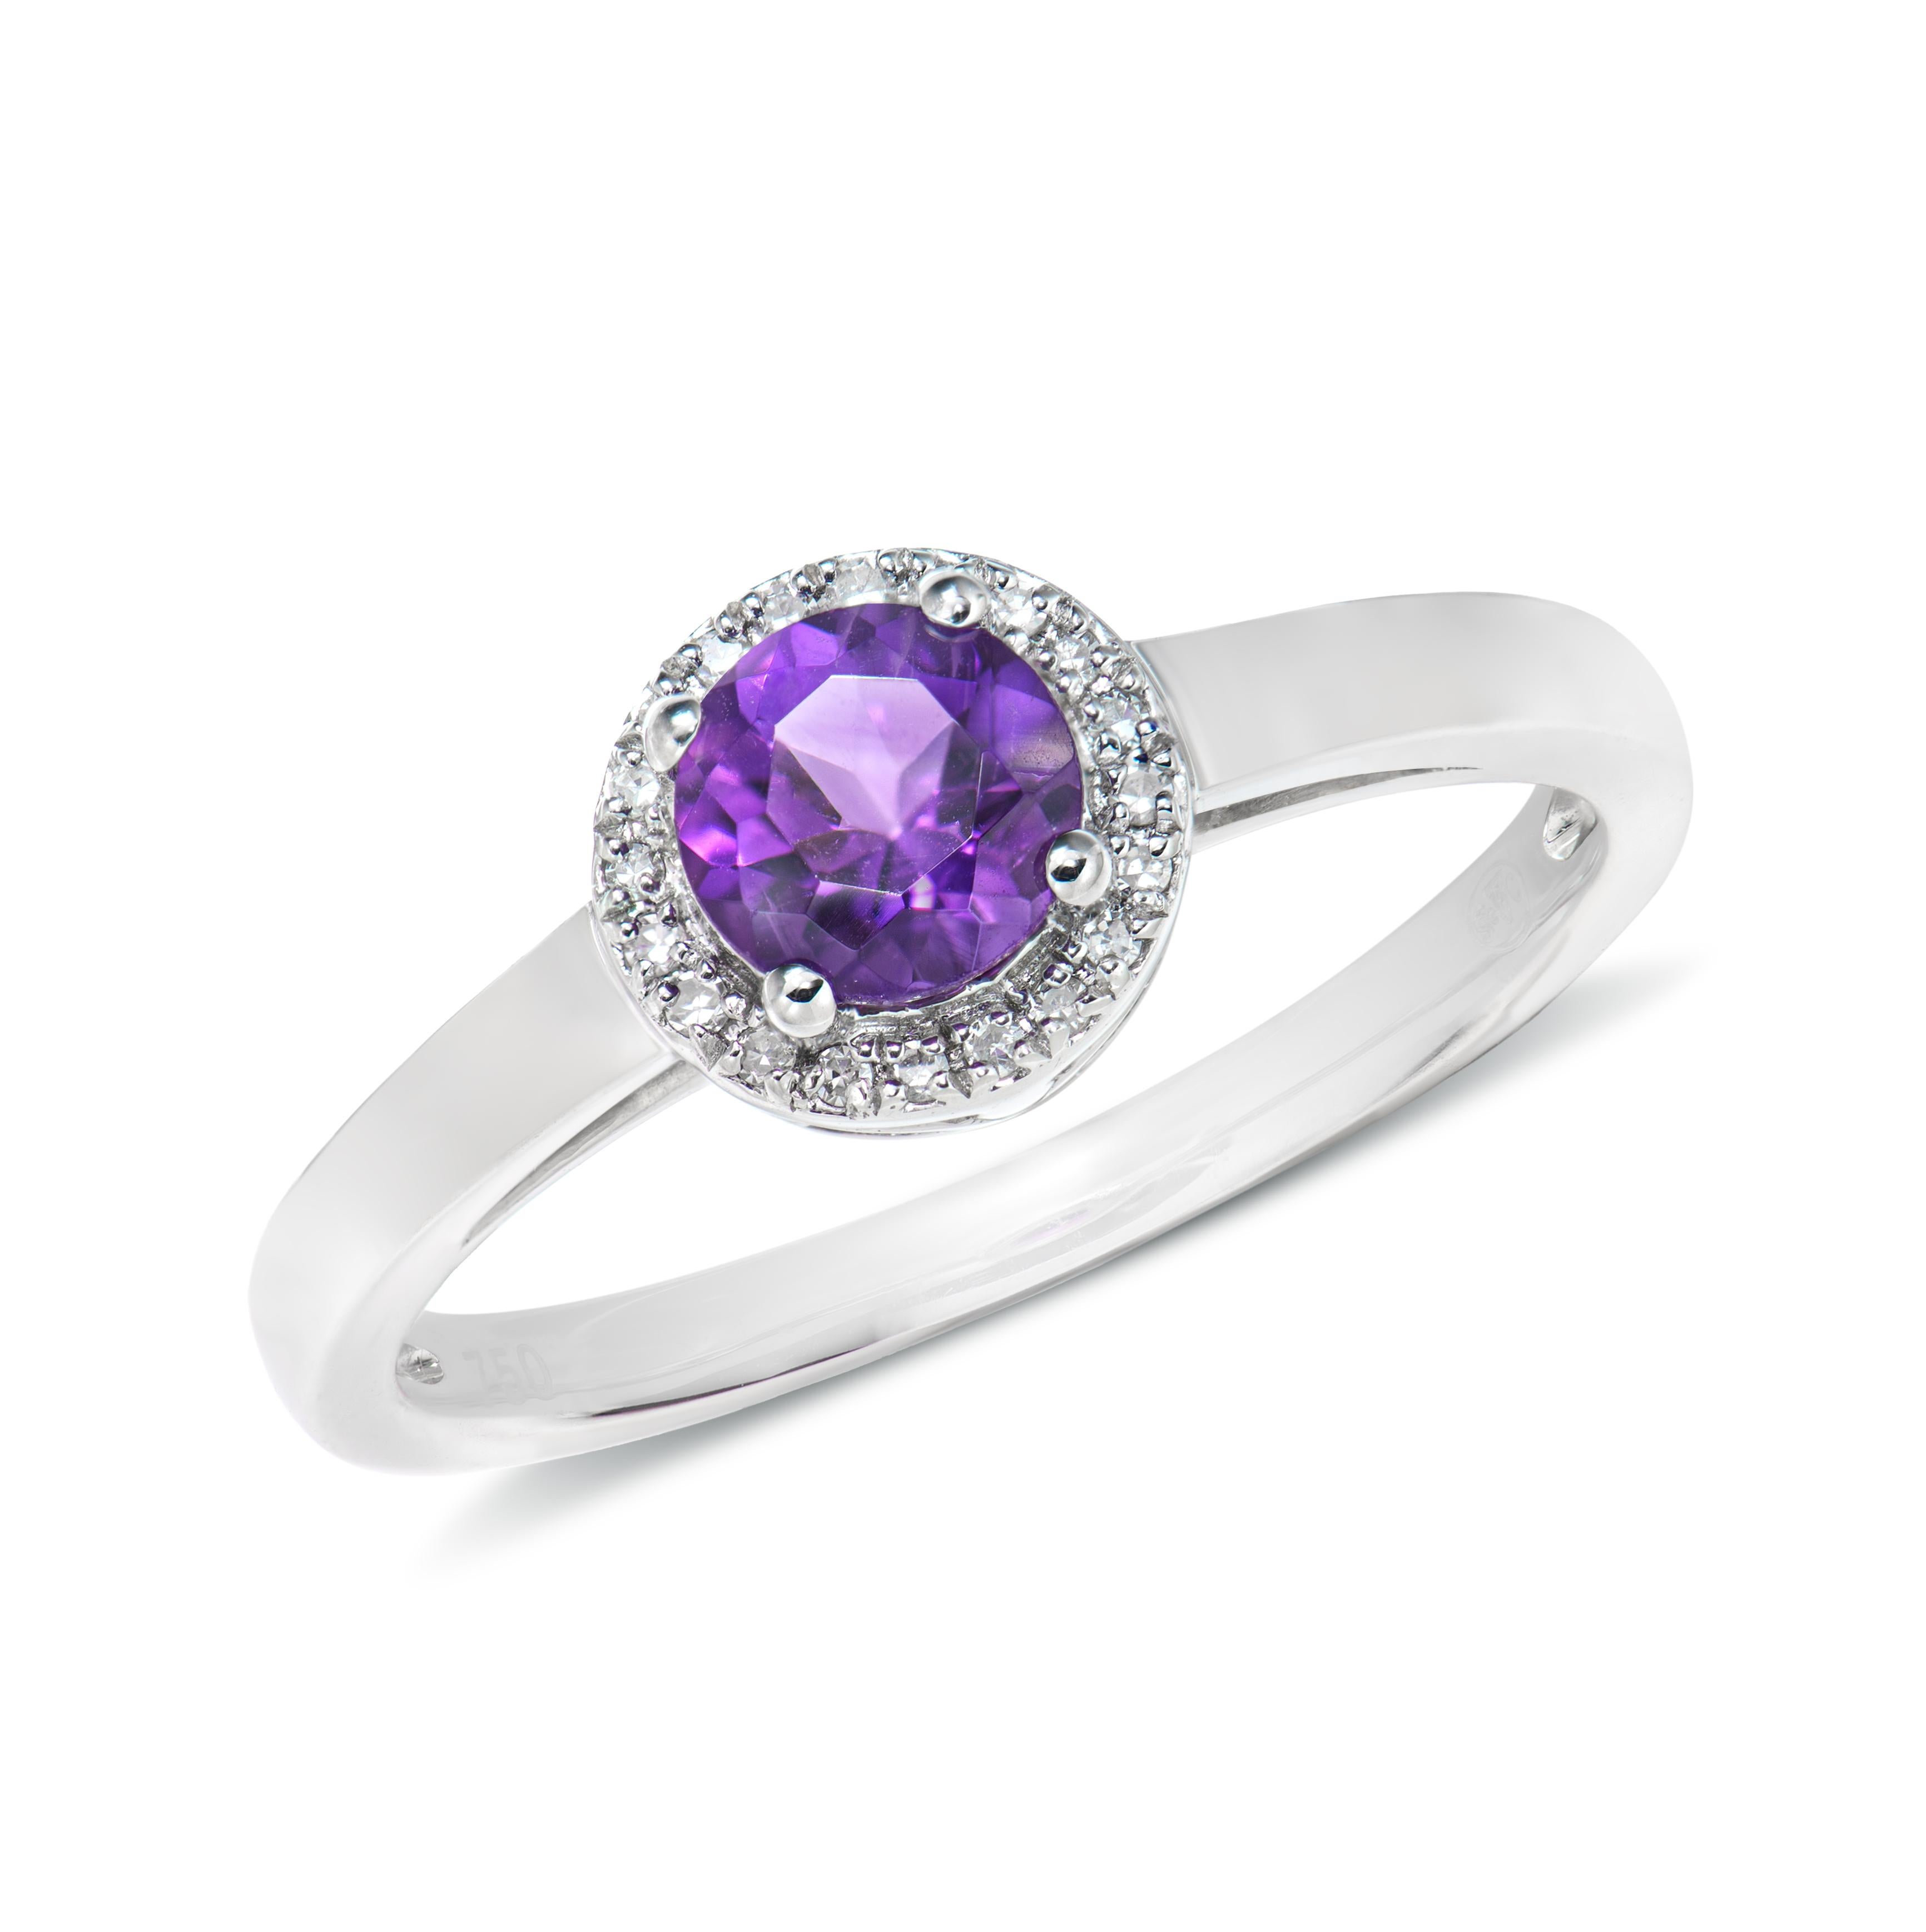 Round Cut 0.40 Carat Amethyst Fancy Ring in 18Karat White Gold with White Diamond.   For Sale